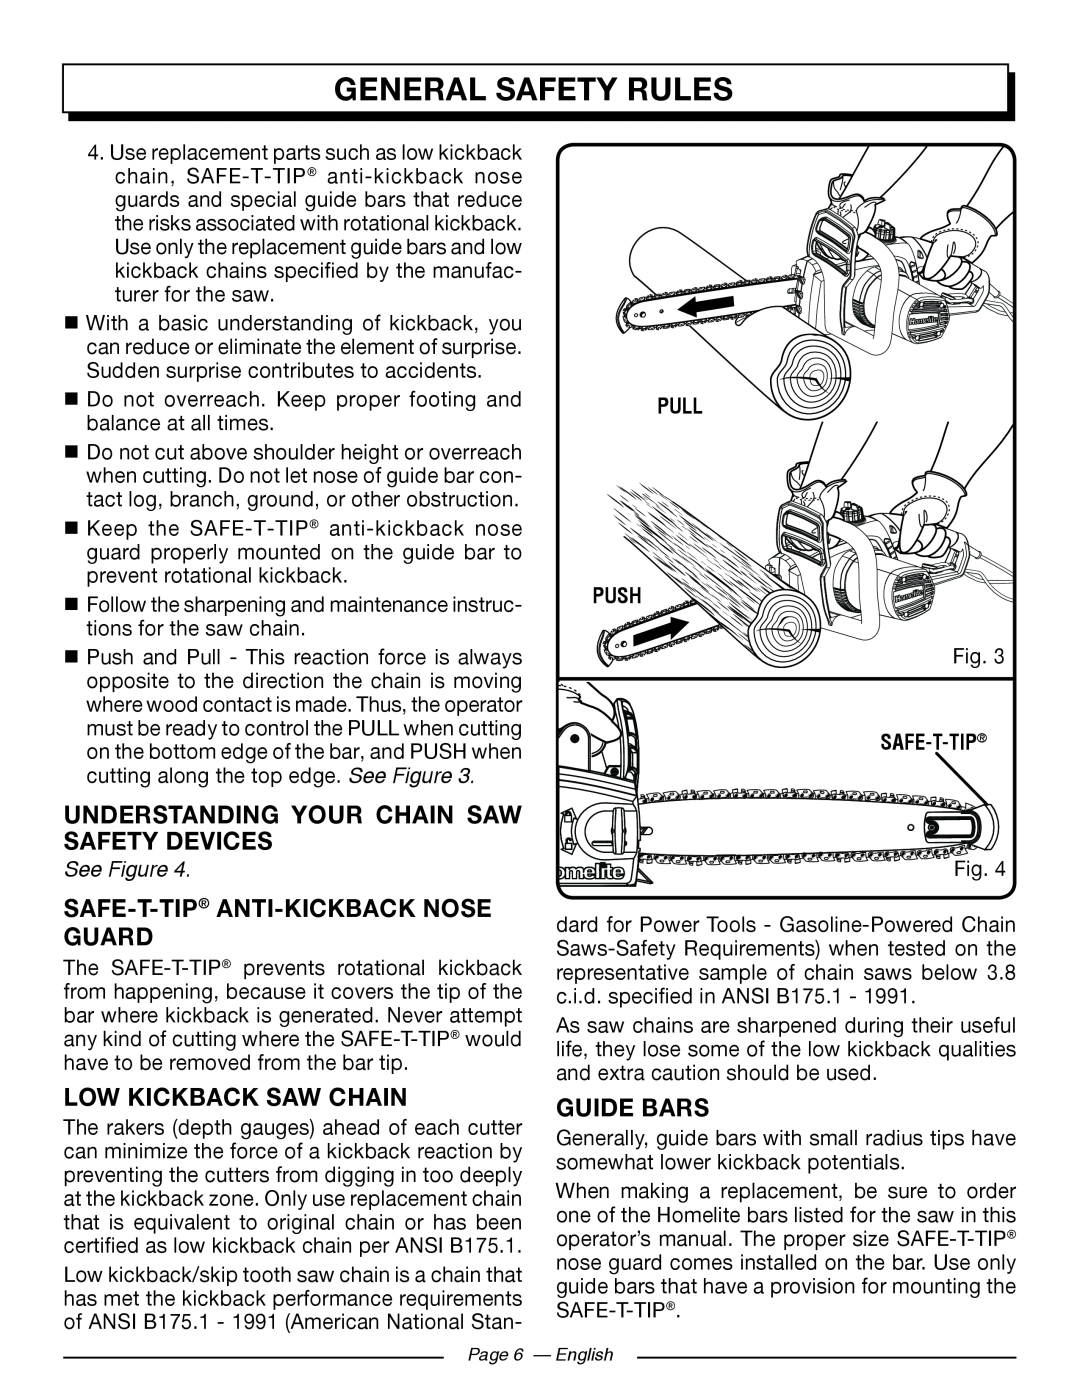 Homelite UT43122 Understanding Your Chain Saw Safety Devices, Safe-T-Tip Anti-Kickback Nose Guard, Low Kickback Saw Chain 